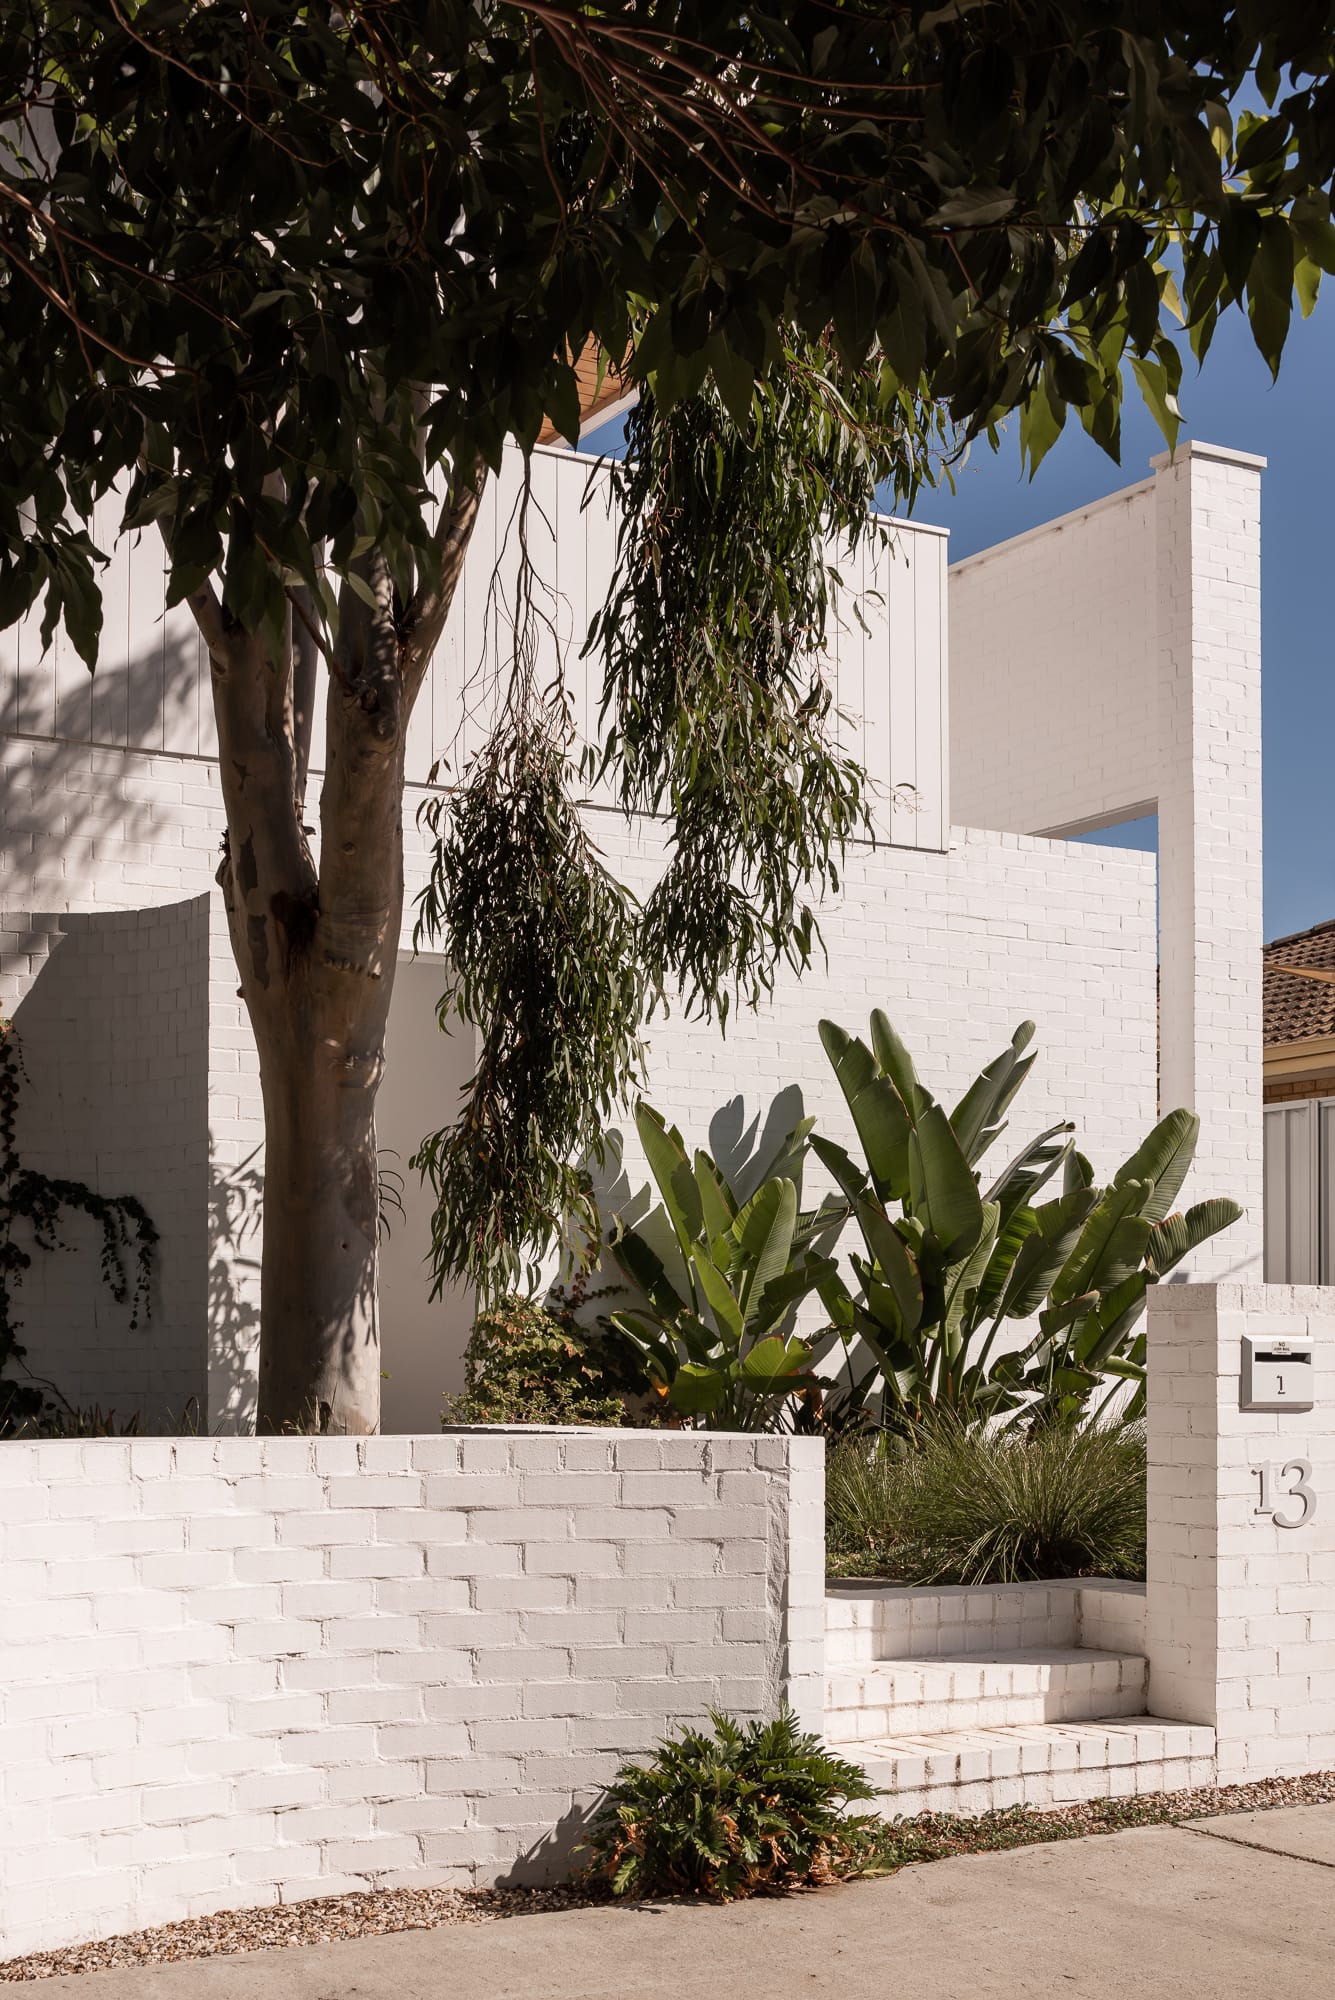 Carrington Street Terraces by MDC Architects. This is an exterior shot of a modern house, featuring clean, white painted brick walls. A tree with a thick trunk and green foliage partially obscures the view. There's a variety of lush greenery, including large broad-leafed plants, adding a touch of nature to the urban setting.